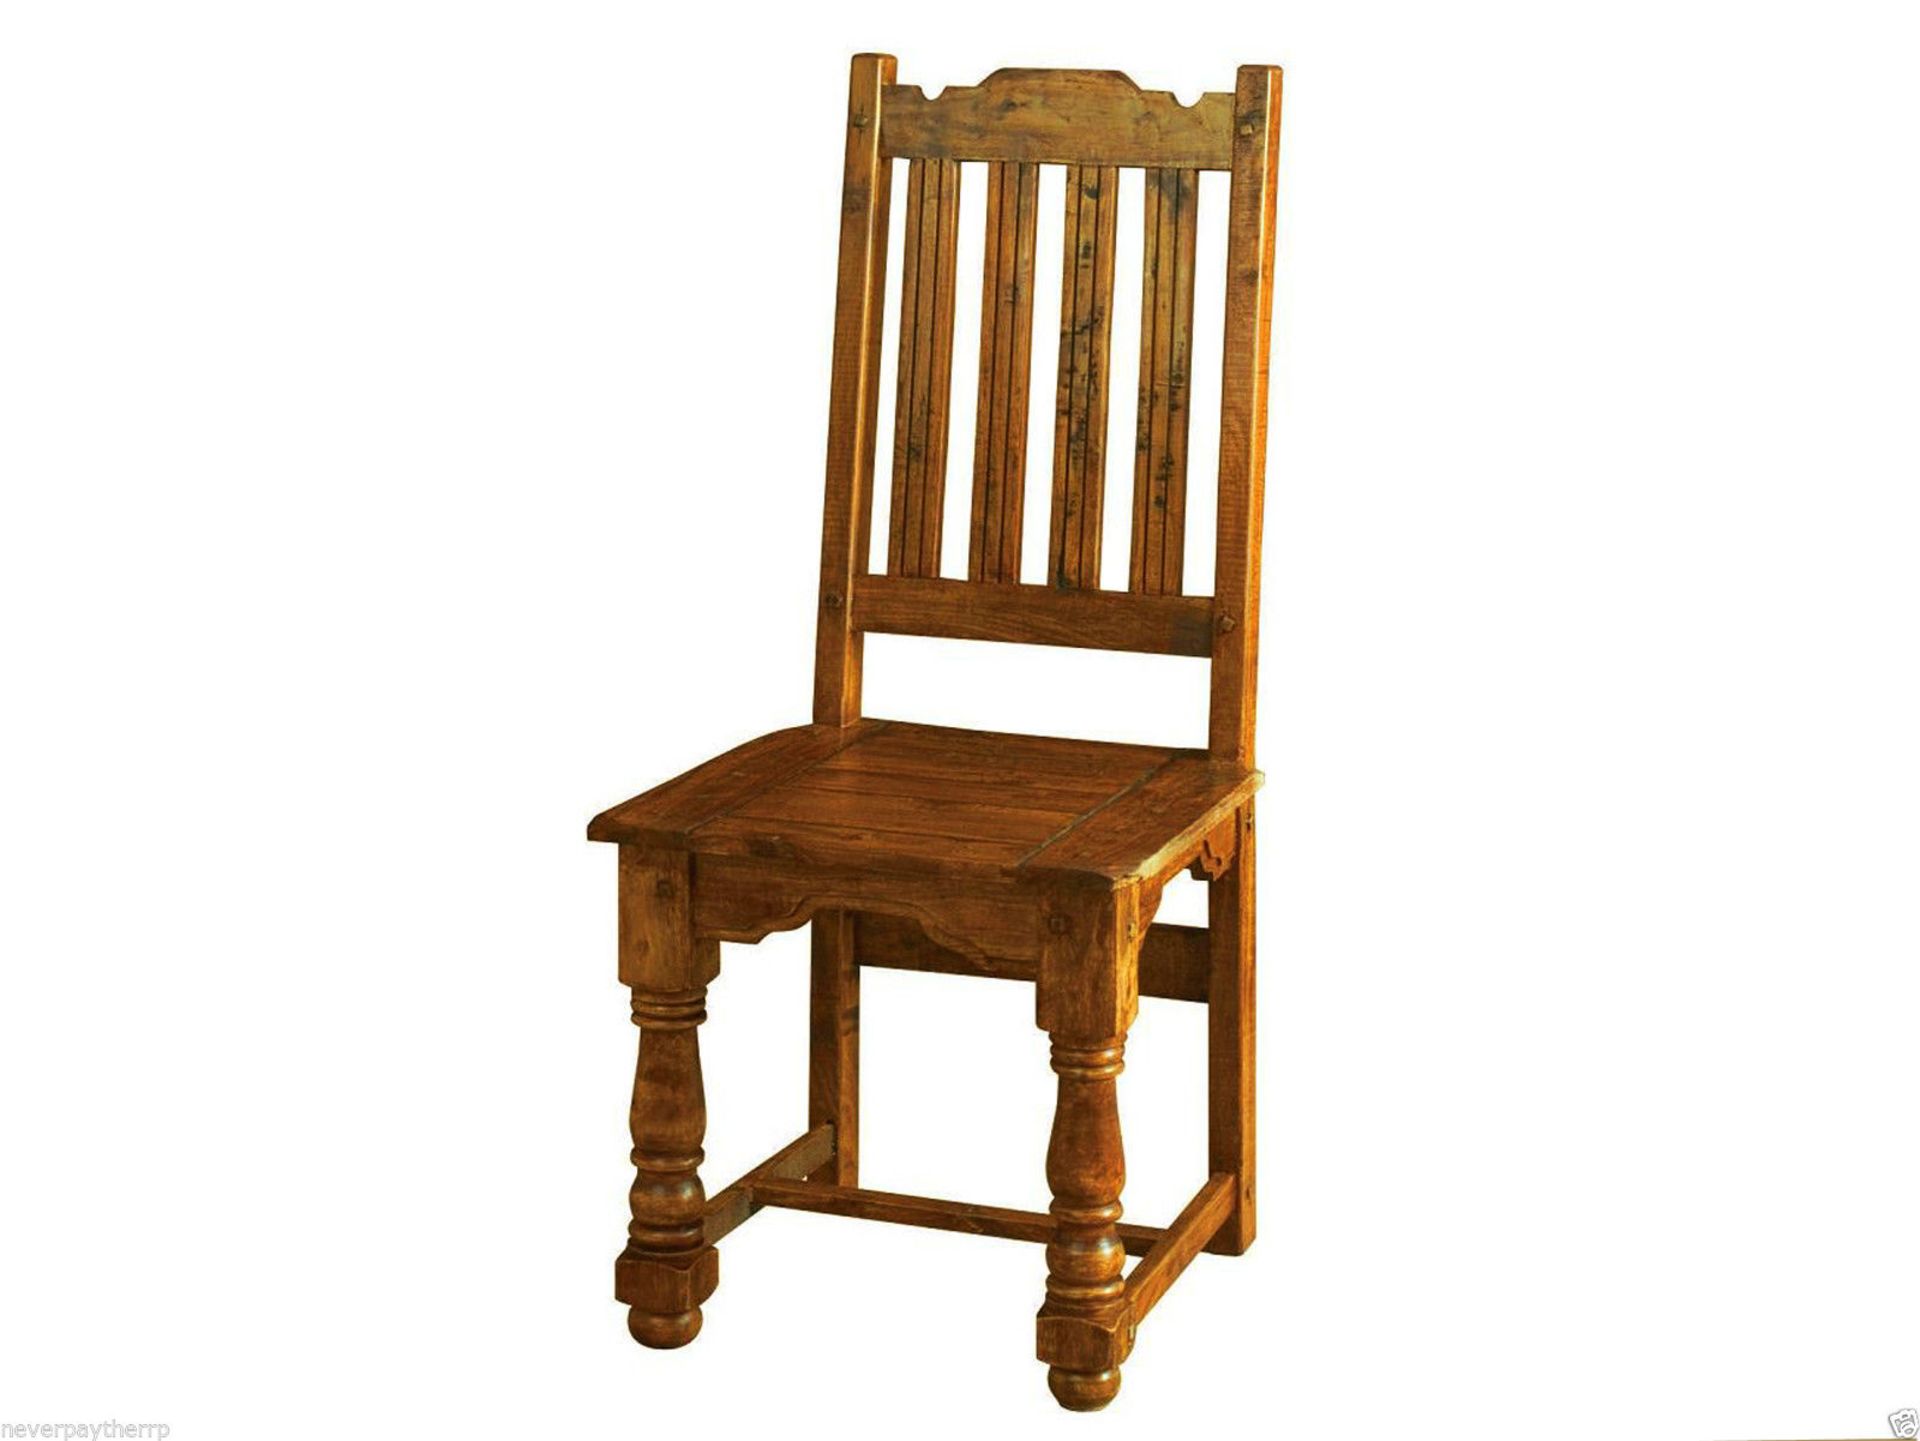 NEW Granary SET of 4 Dining Chairs, Solid Acacia Wood TPP008 RRP £77.20 each. New & boxed perfect - Image 3 of 5